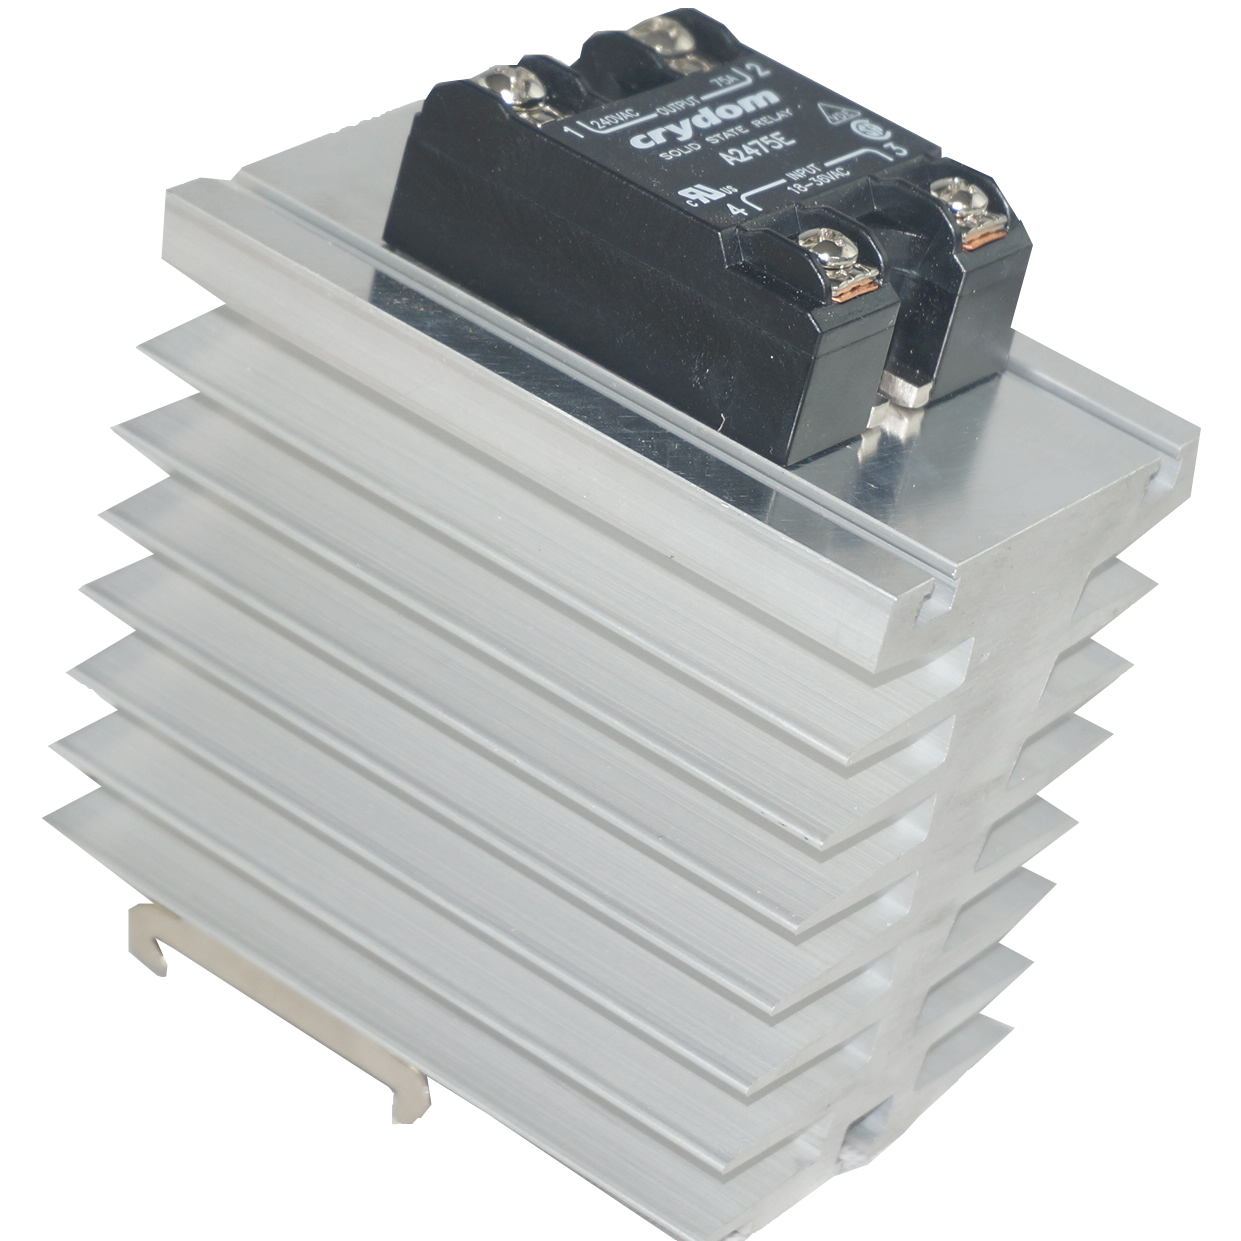 GFIN/100M-DR + A2450G, Din Rail Mount Solid State Relay with Heatsink, 90-280VAC Control Input, 24-280VAC Output, 50 Amps @ 40 Deg C ambient